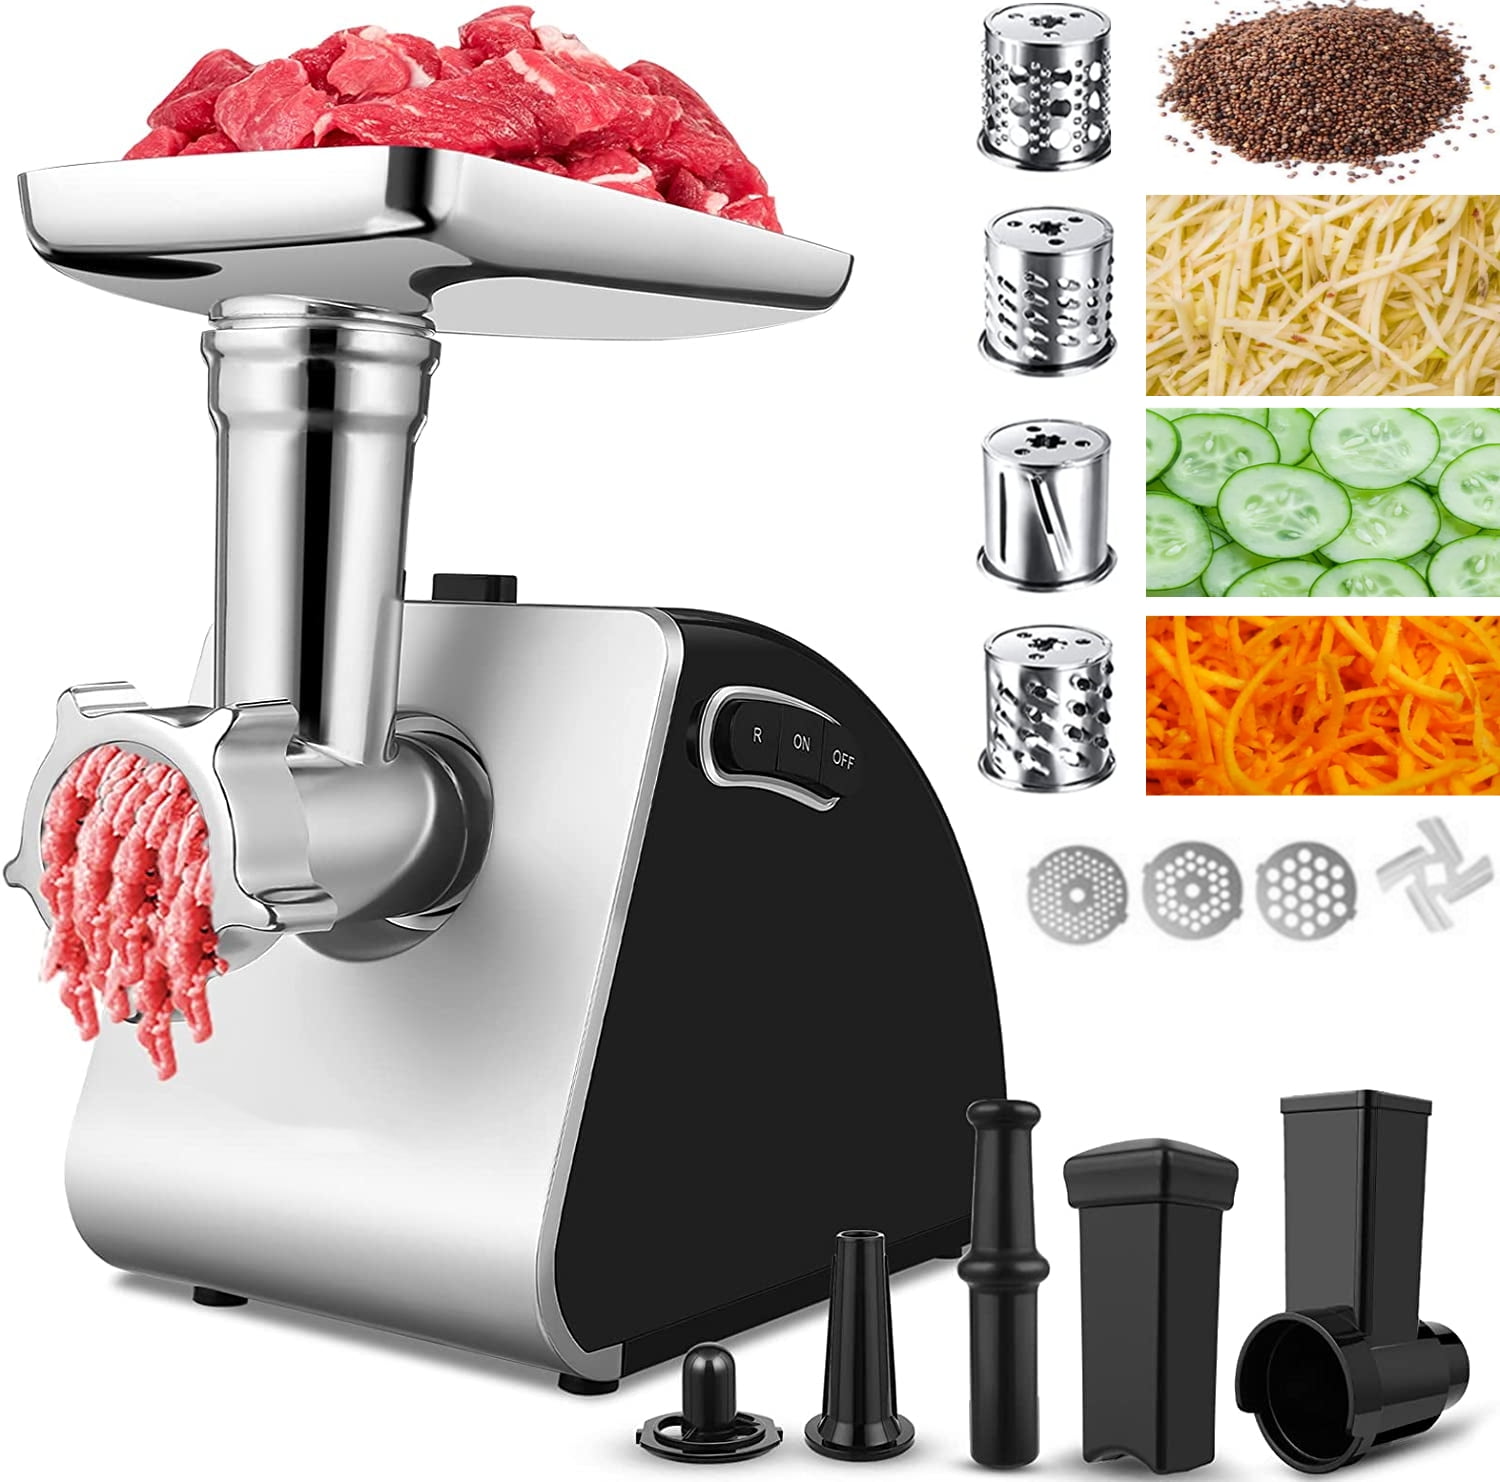 Stainless Steel/Silver/2000W Sausage Stuffer with 3 Grinding Plates and Sausage Stuffing Tubes for Home Use &Commercial Max Electric Meat Grinder 